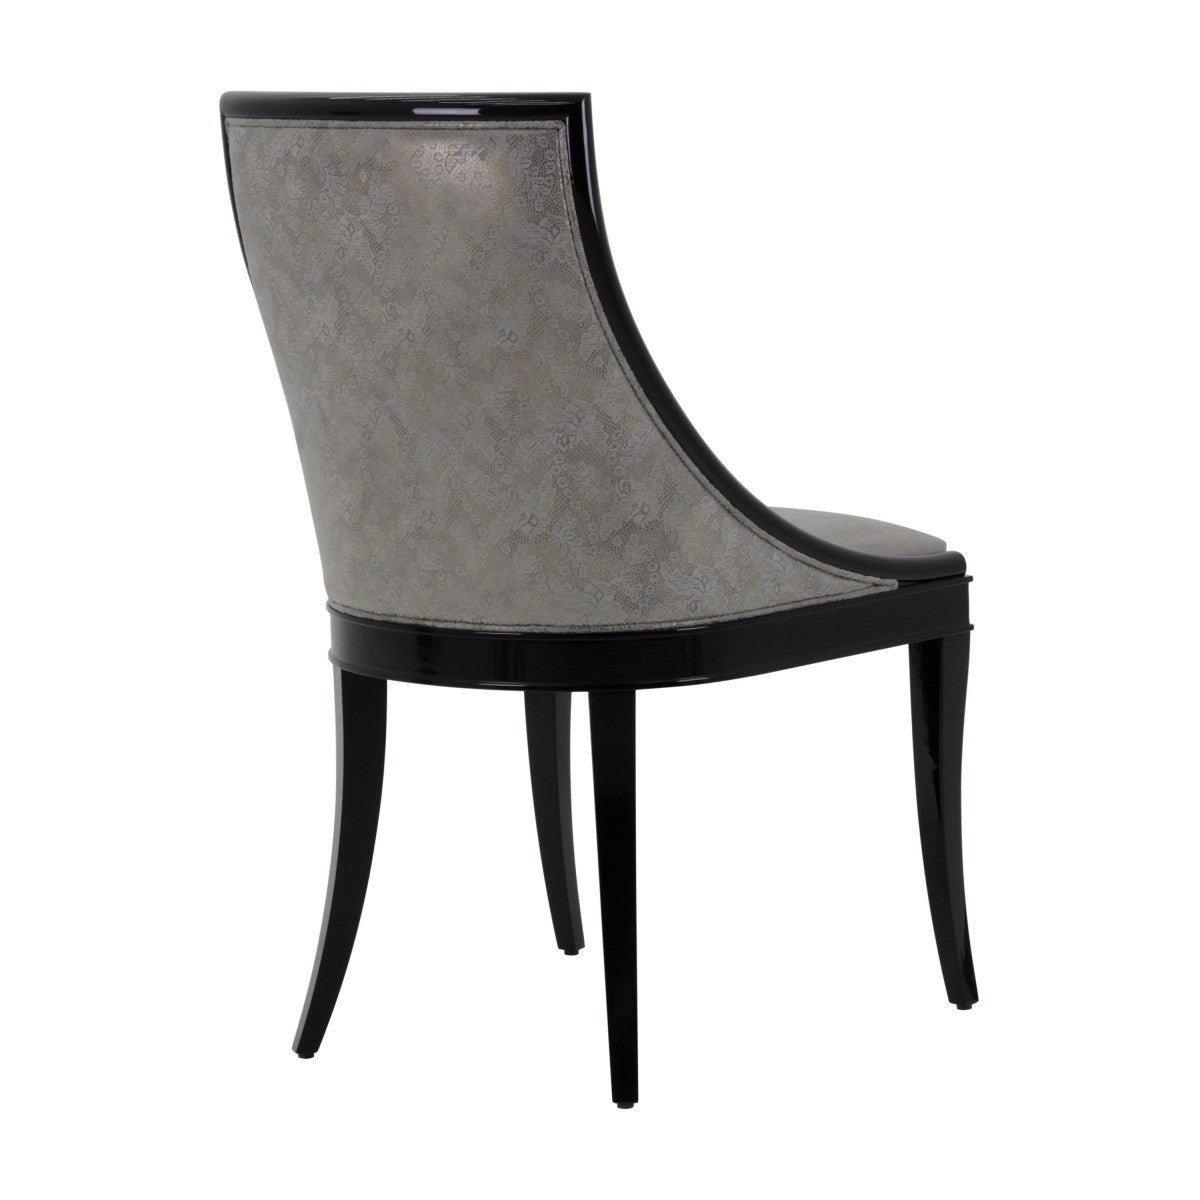 Amina Bespoke Upholstered Modern Contemporary Dining Chair MS434S Custom Made To Order